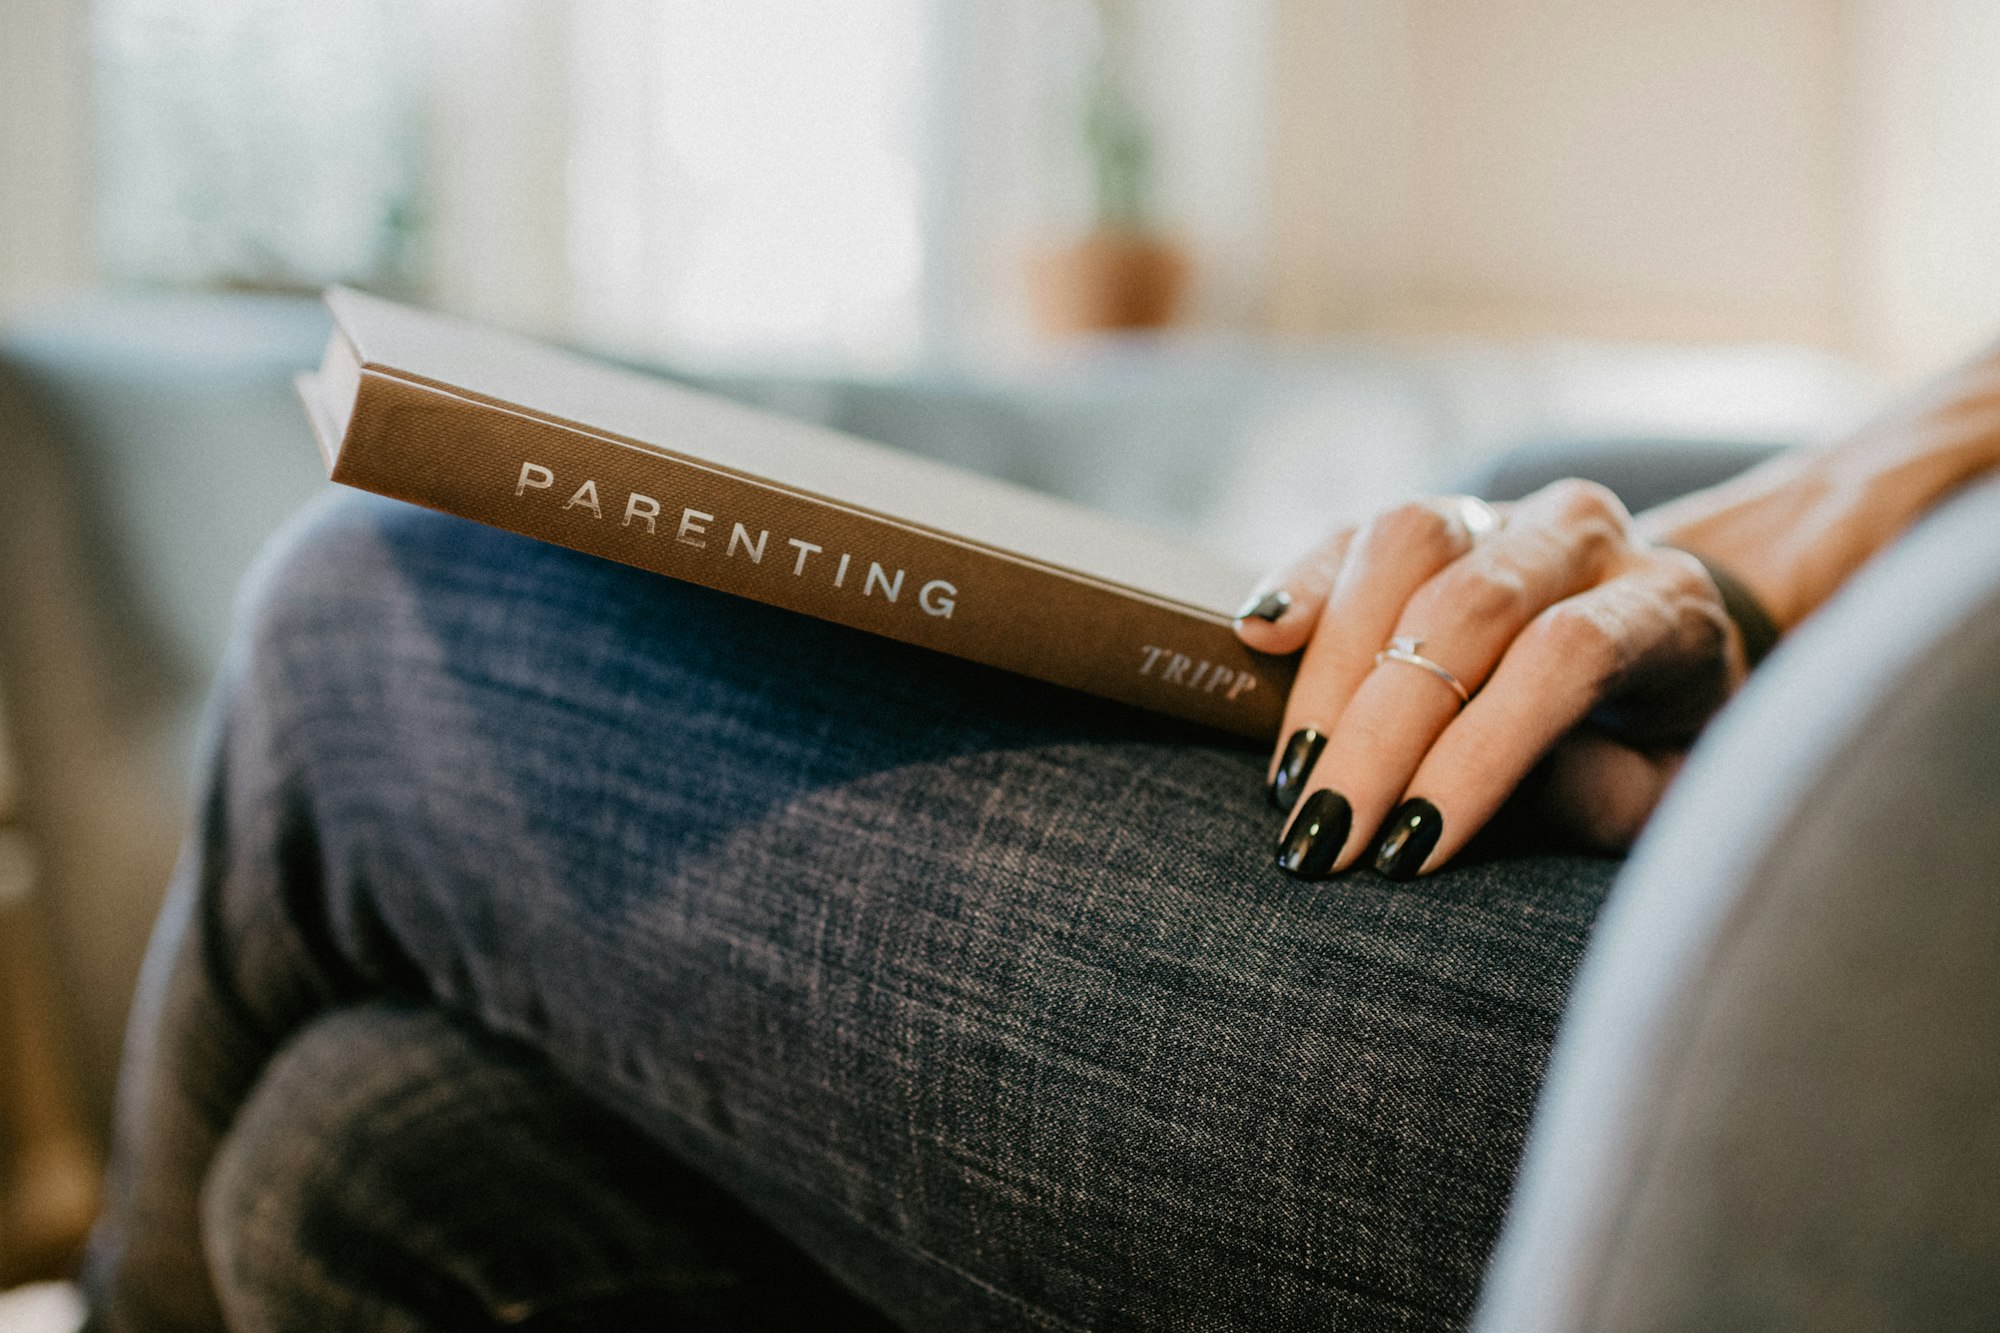 Parenting book on a woman's lap